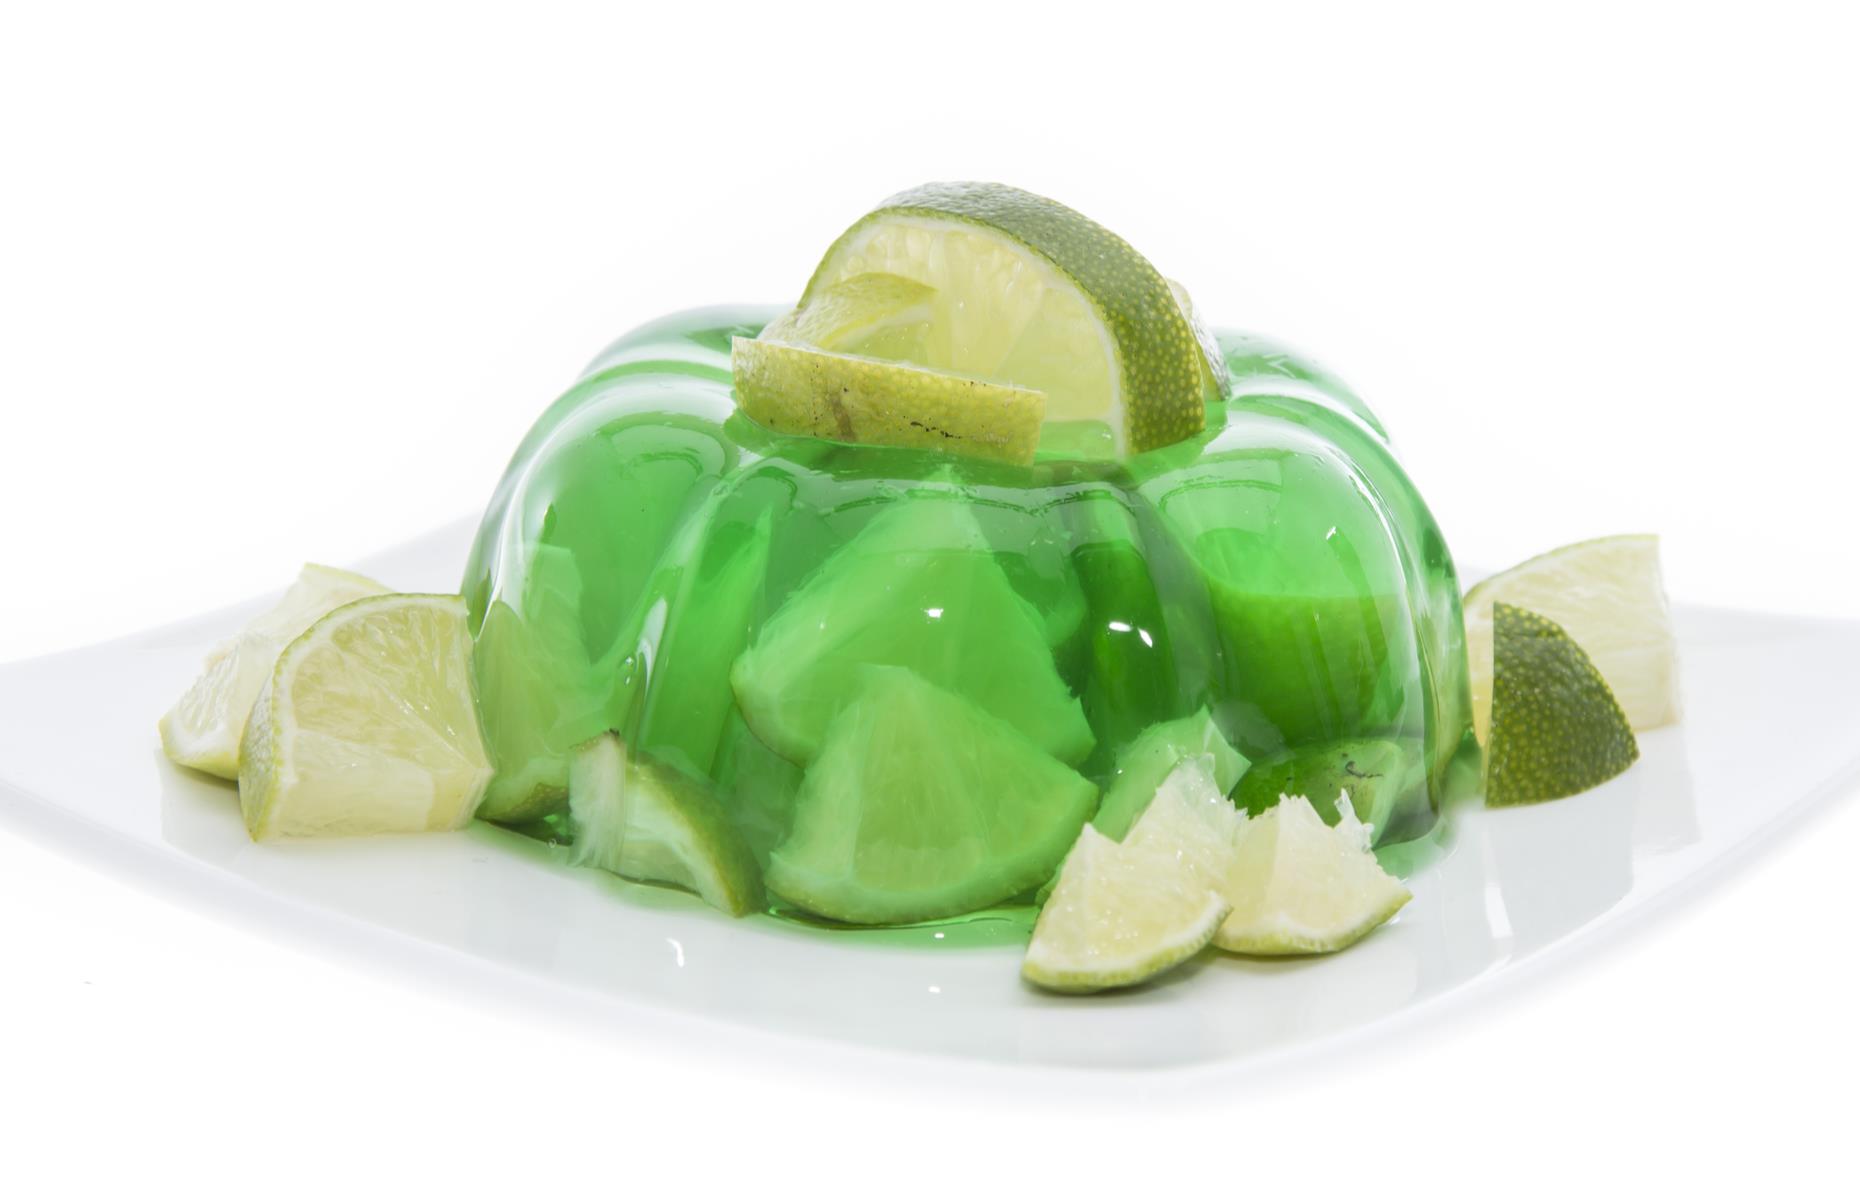 <p>Senator Mike Lee usually hosts regular <a href="https://www.lee.senate.gov/public/index.cfm/jell-o-with-the-senator">‘Jello-O Wednesdays’</a> at his Washington DC office to make “visitors from Utah feel at home”. The most favored flavor is lime, which is often eaten by the spoonful with the addition of grated carrots and often brought to family get-togethers, church events and community cookouts. The <a href="https://www.latimes.com/archives/la-xpm-2002-feb-13-fo-jello13-story.html">widely held theory</a> is that the jiggly stuff is so popular because Utah has a high number of teetotal Mormons, who eat sweet treats in place of alcohol.</p>